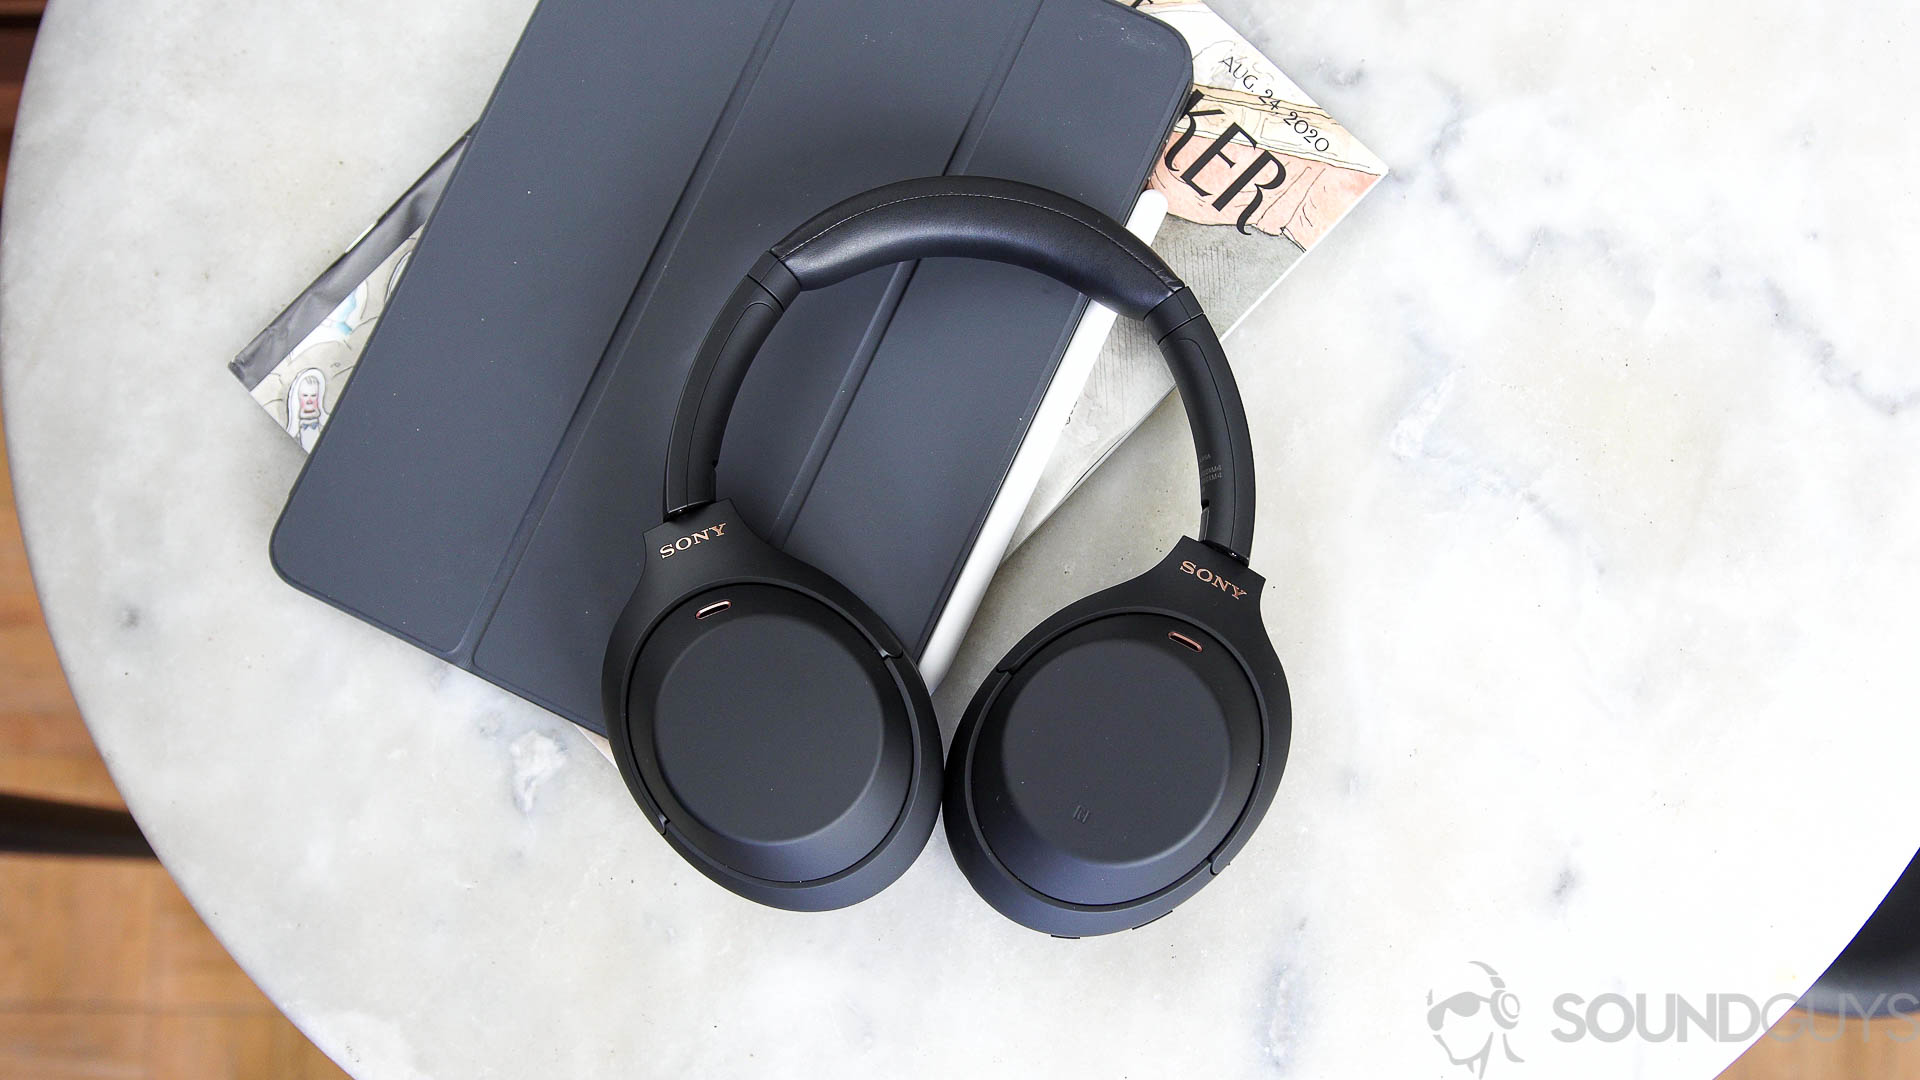 Sony WH-1000XM4 headphones next to iPad Pro on a marble surface